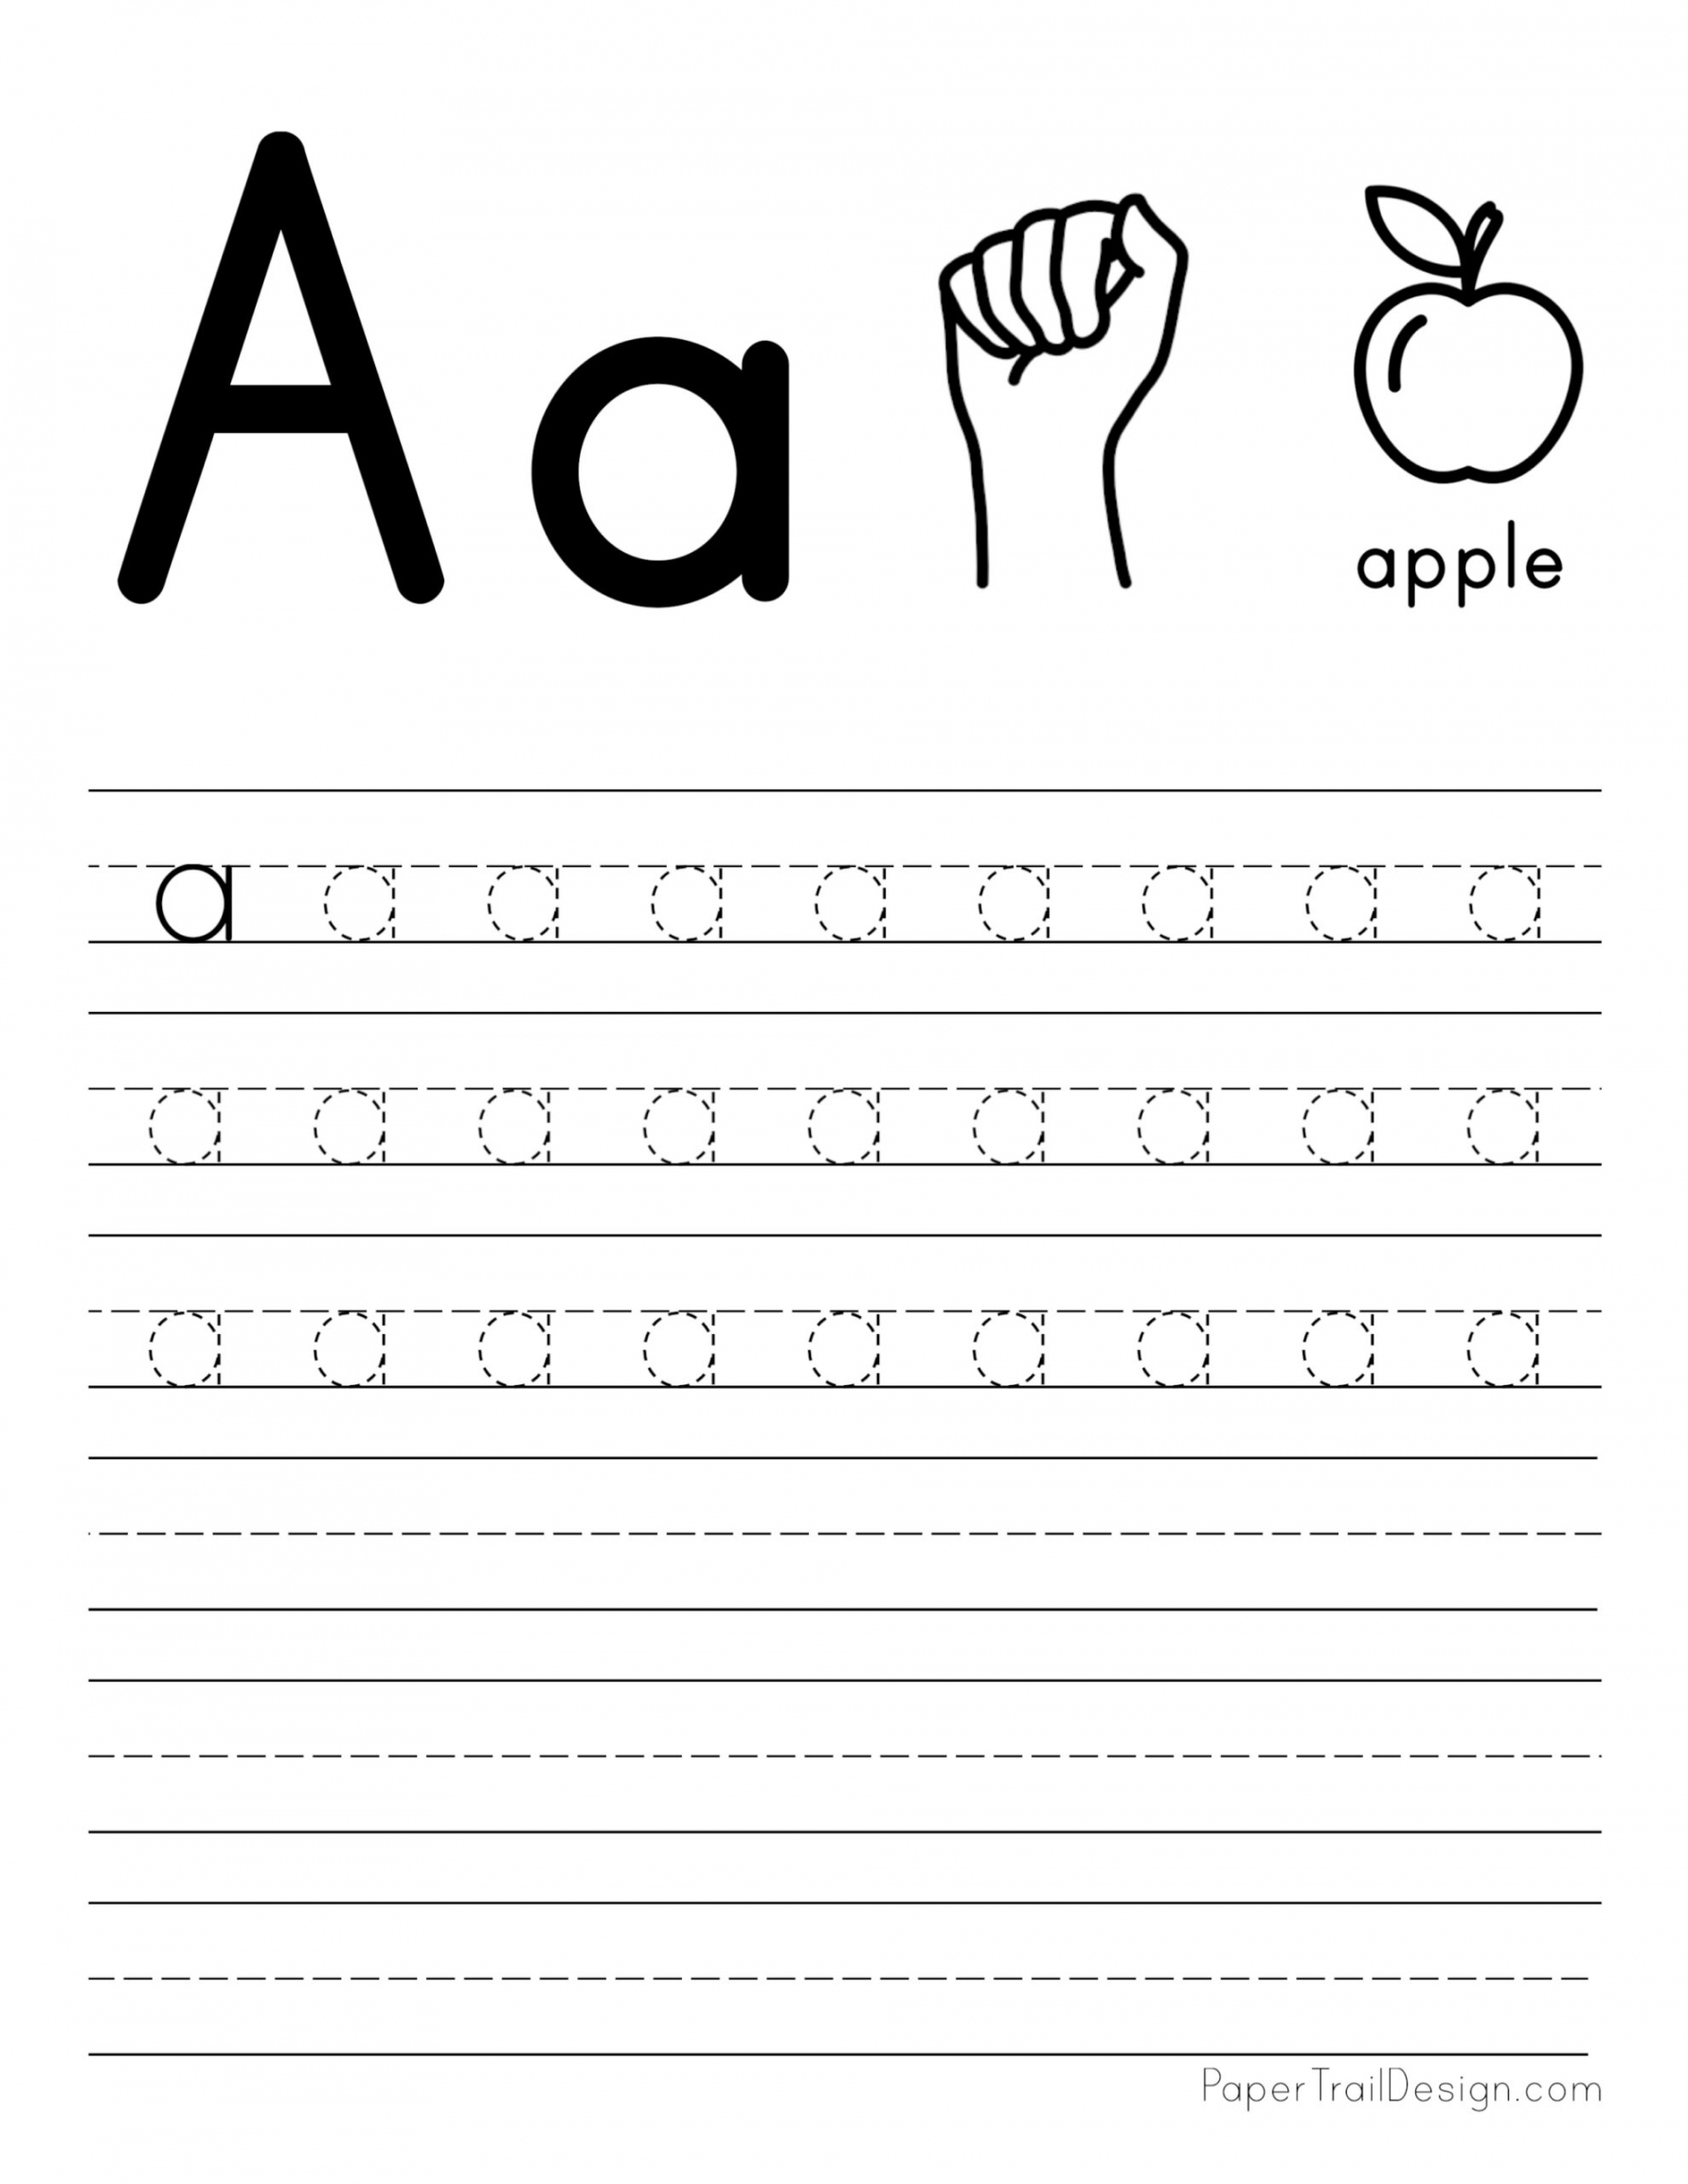 Free Letter Tracing Printable - Printable - Free Letter Tracing Worksheets - Paper Trail Design